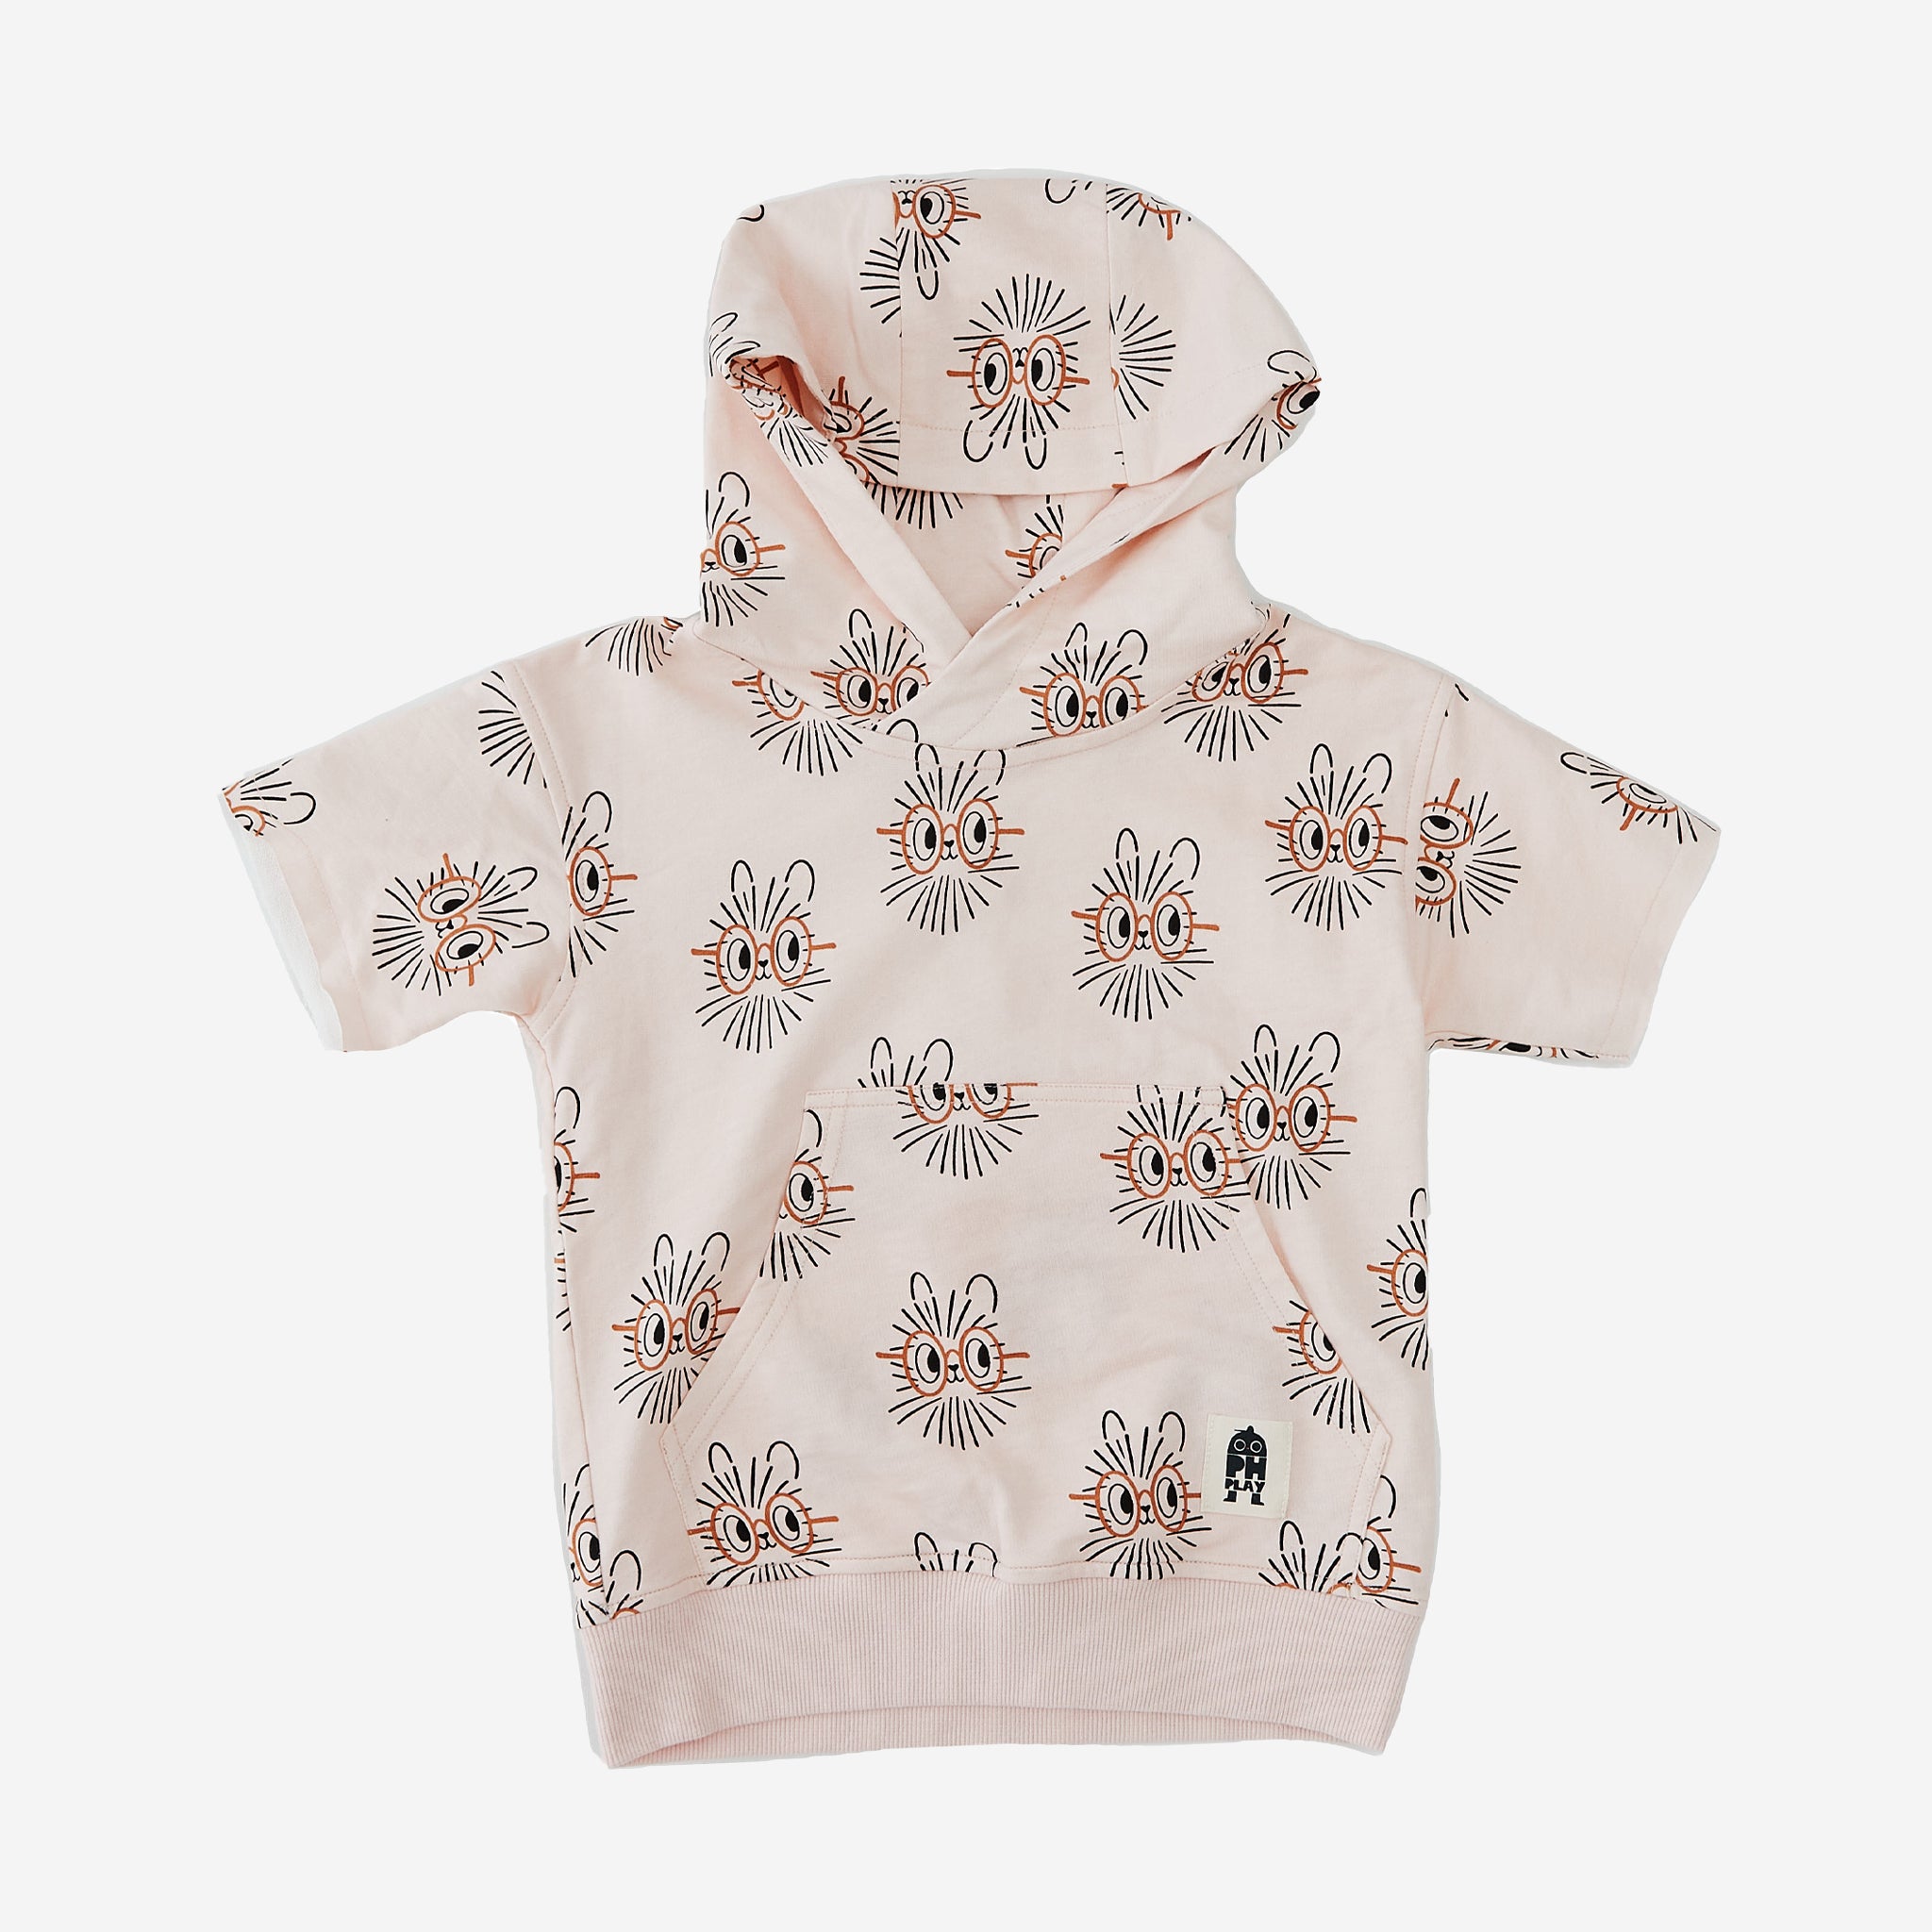 The Hedgehog short sleeve Print Hoodie has a light peach background with Hedgehog abstract faces with a cute orange eye glasses. the hoodie has an attached hat and kangaroo pocket.